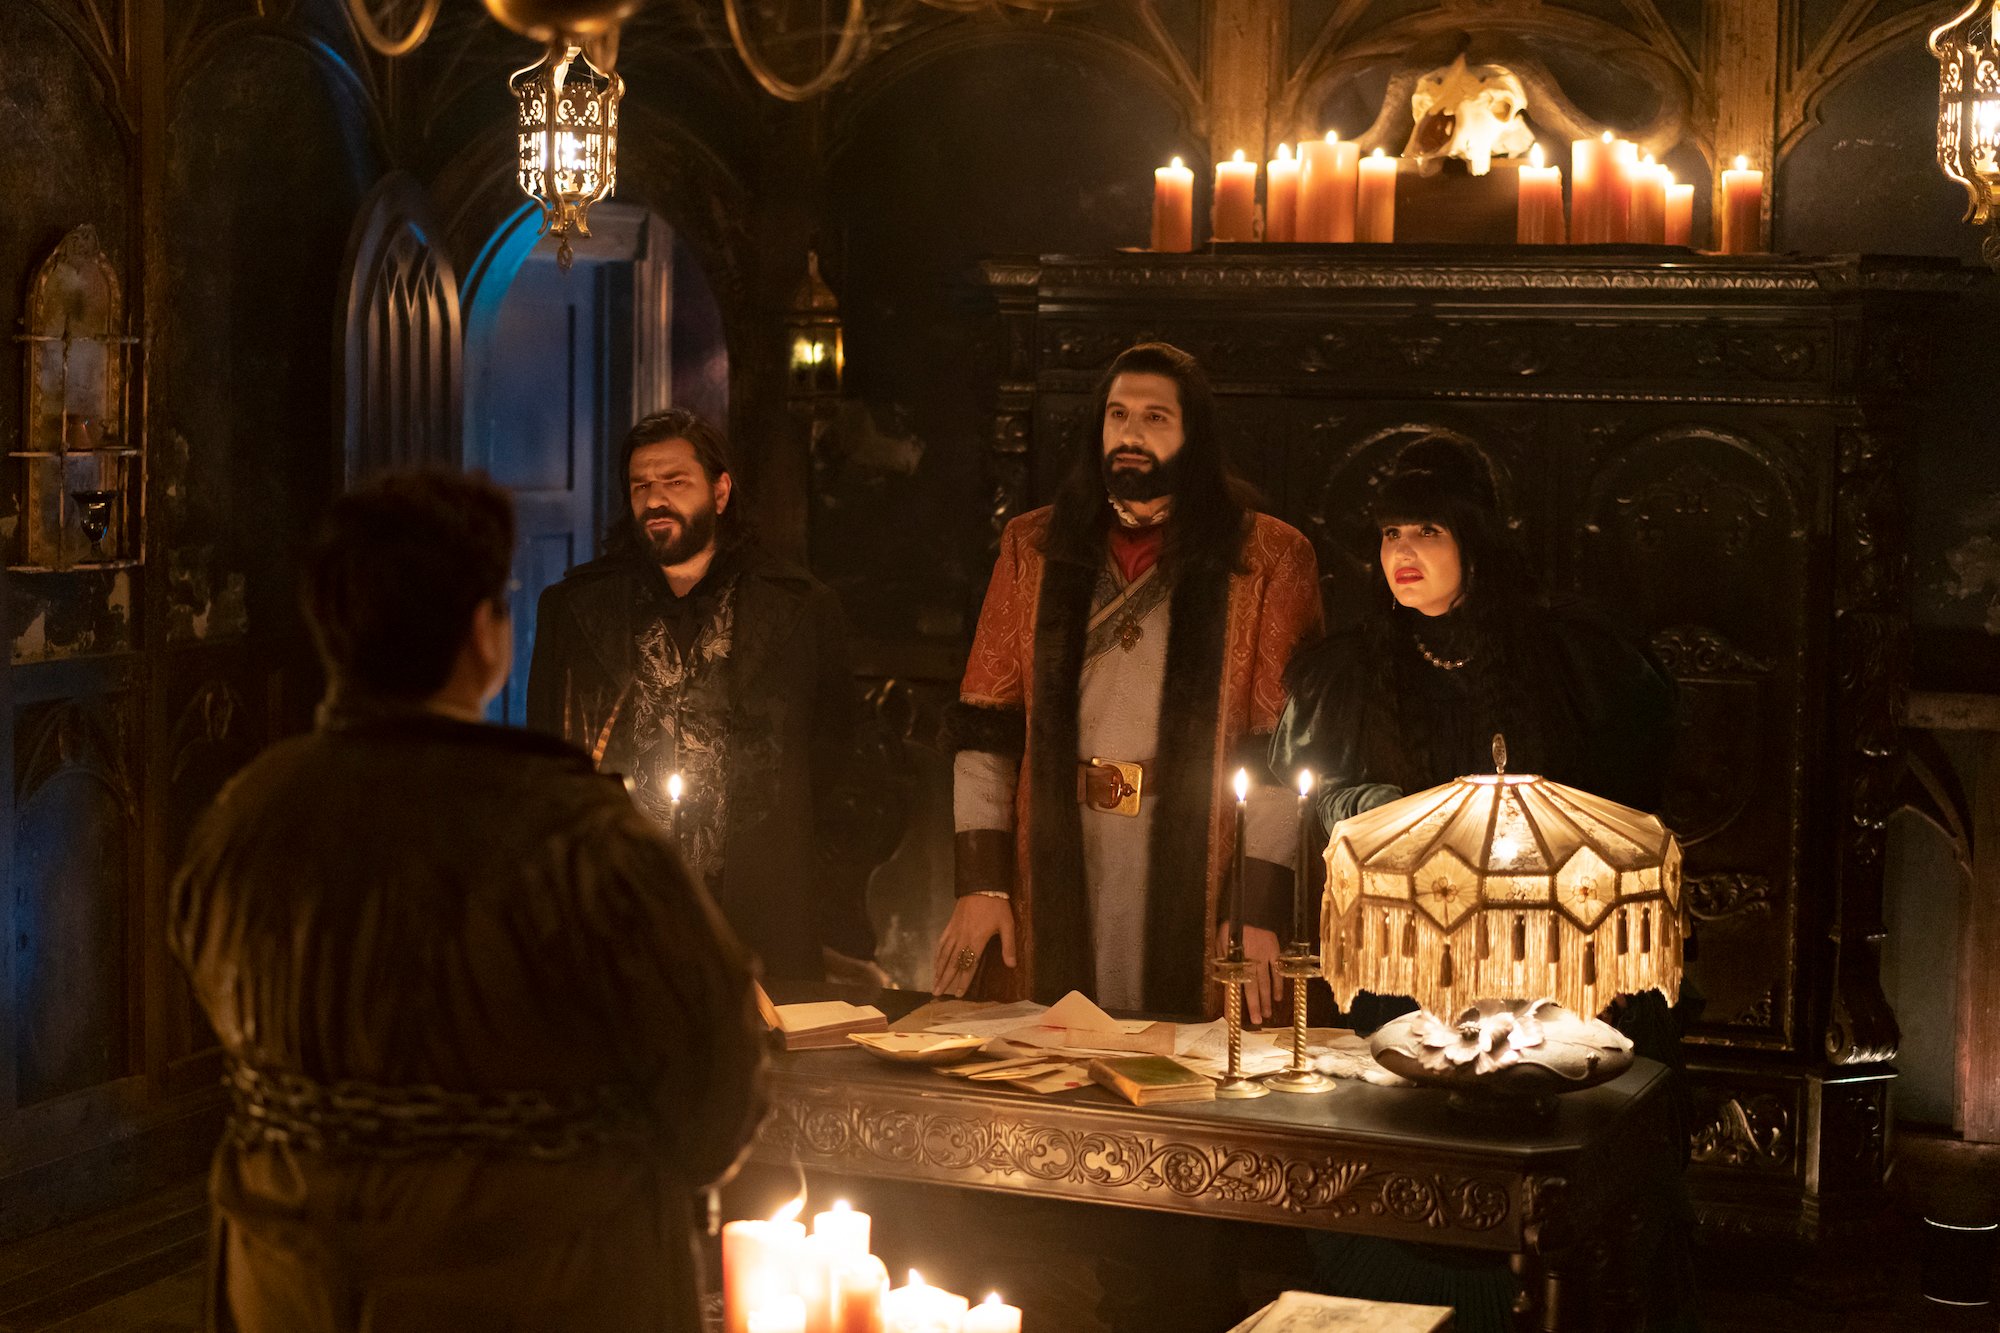 What We Do In the Shadows Season 3 premiere: Laszlo, Nandor, Nadja and Guillermo stand up